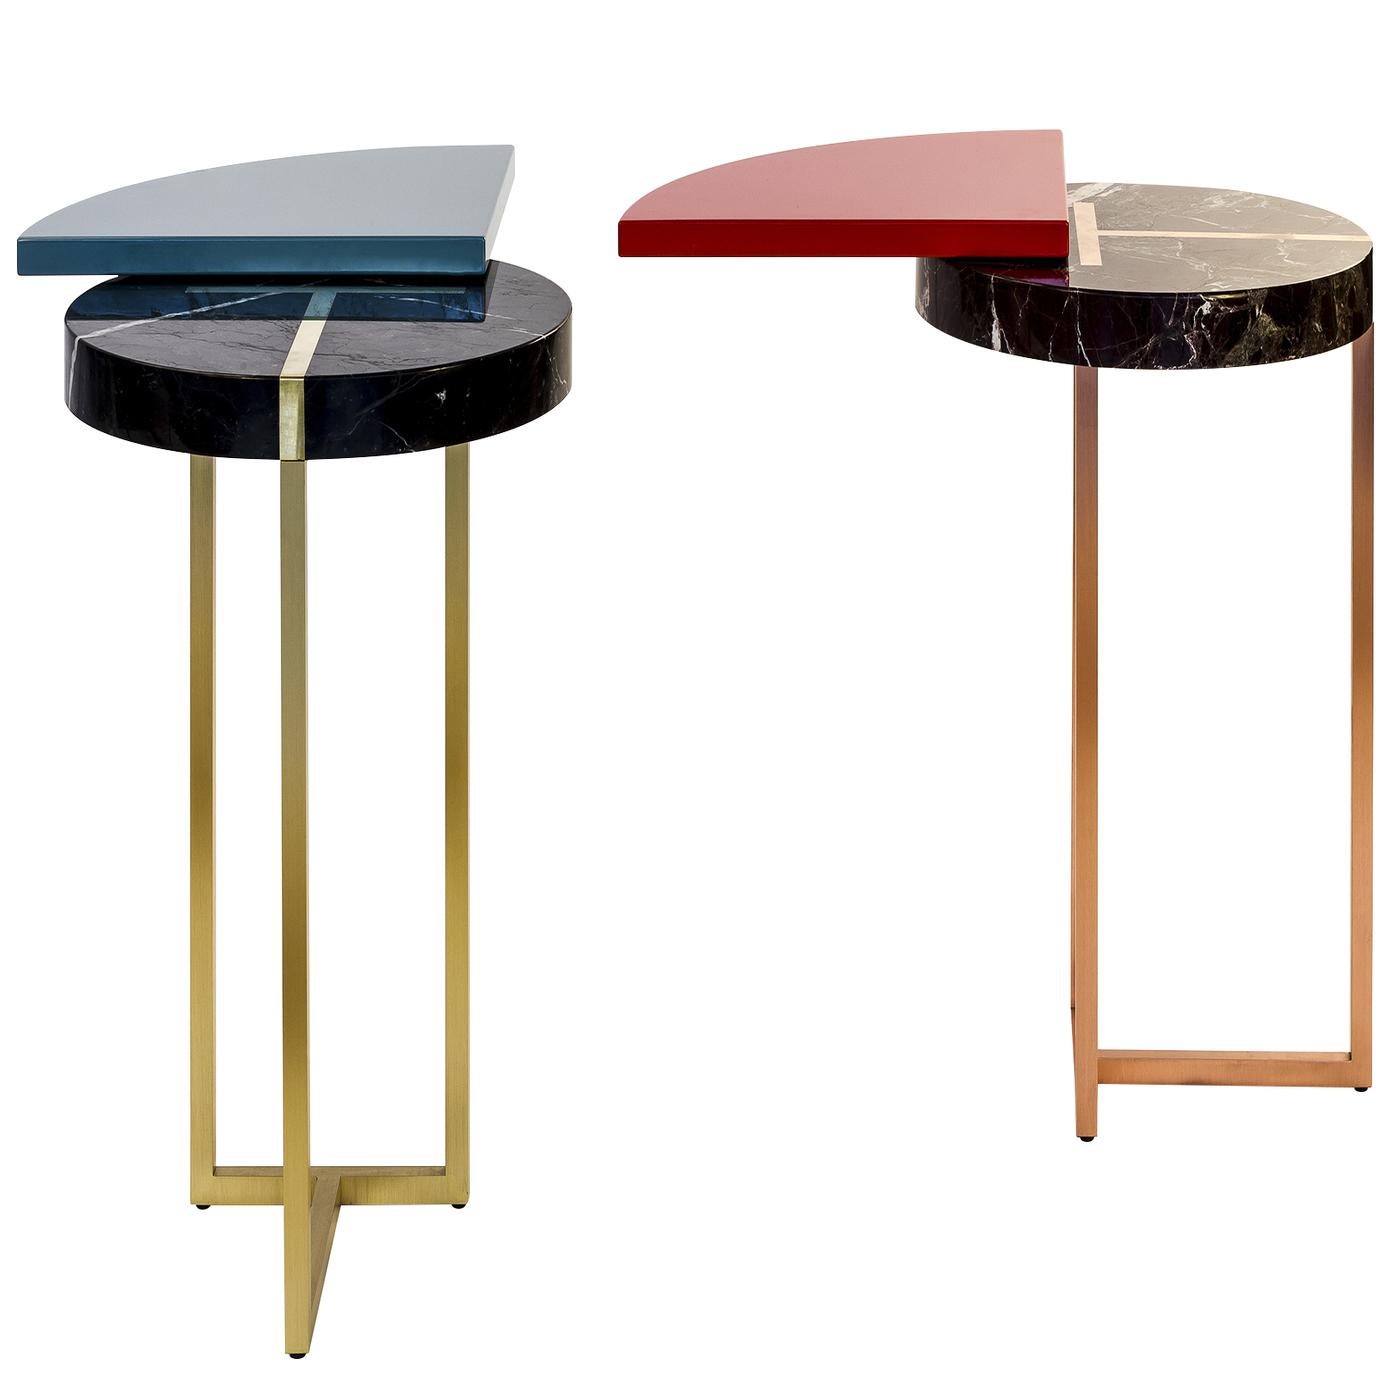 Part of the Intersections collection, the red wing end table is a contemporary piece creates a harmonious aesthetic. The brass base and Marquinia marble perfectly complement the vertical pivot that allows the rotation of the lacquered wood.